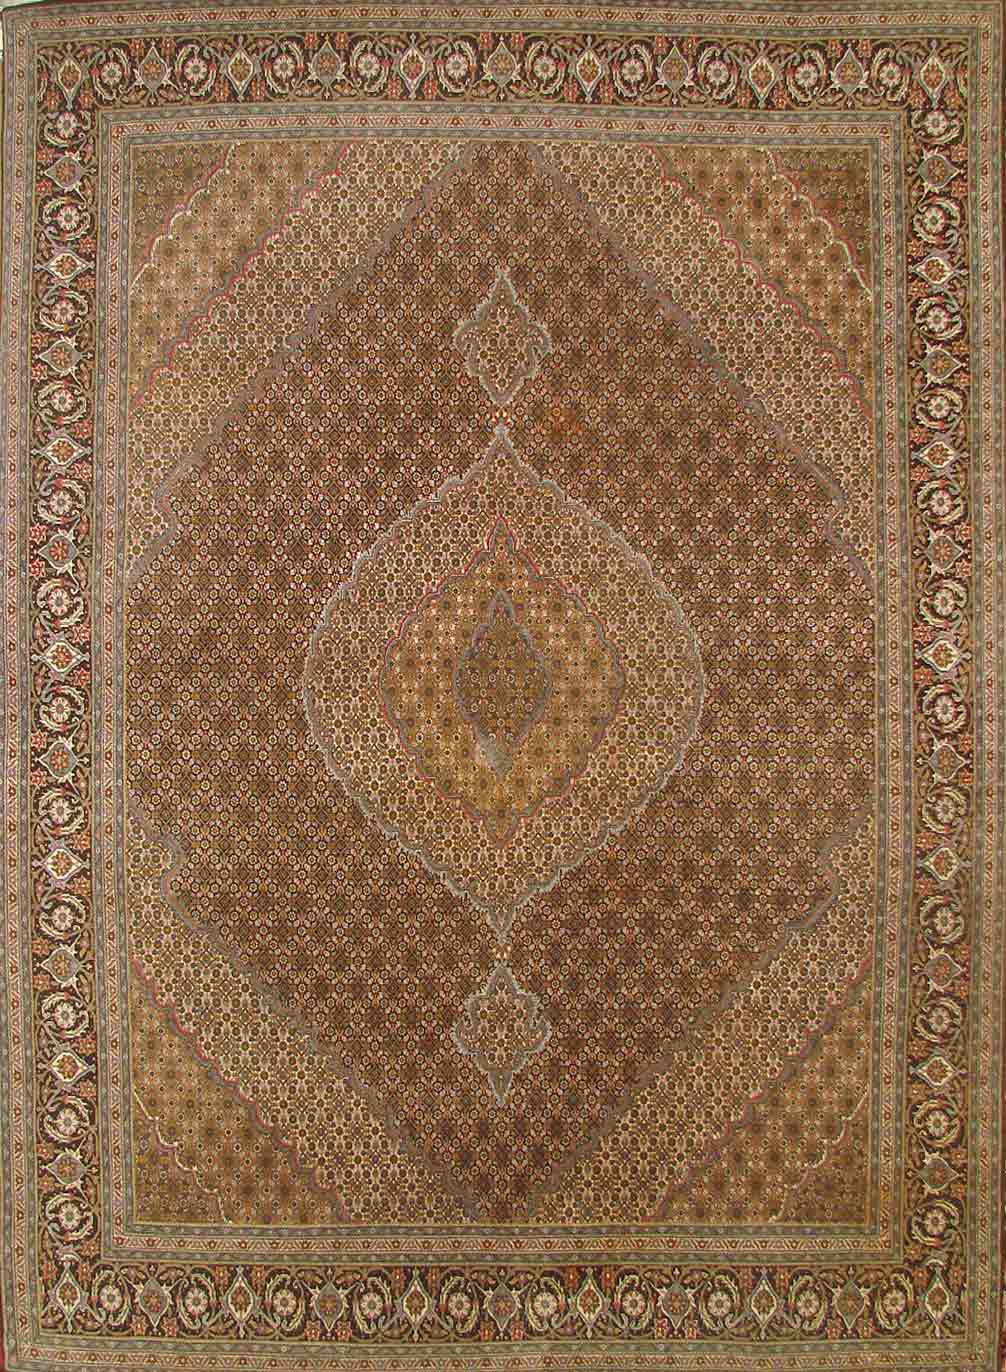 Antique Style Rugs MAHI TABRIZ 20114 Lt. Brown - Chocolate Hand Knotted Rug